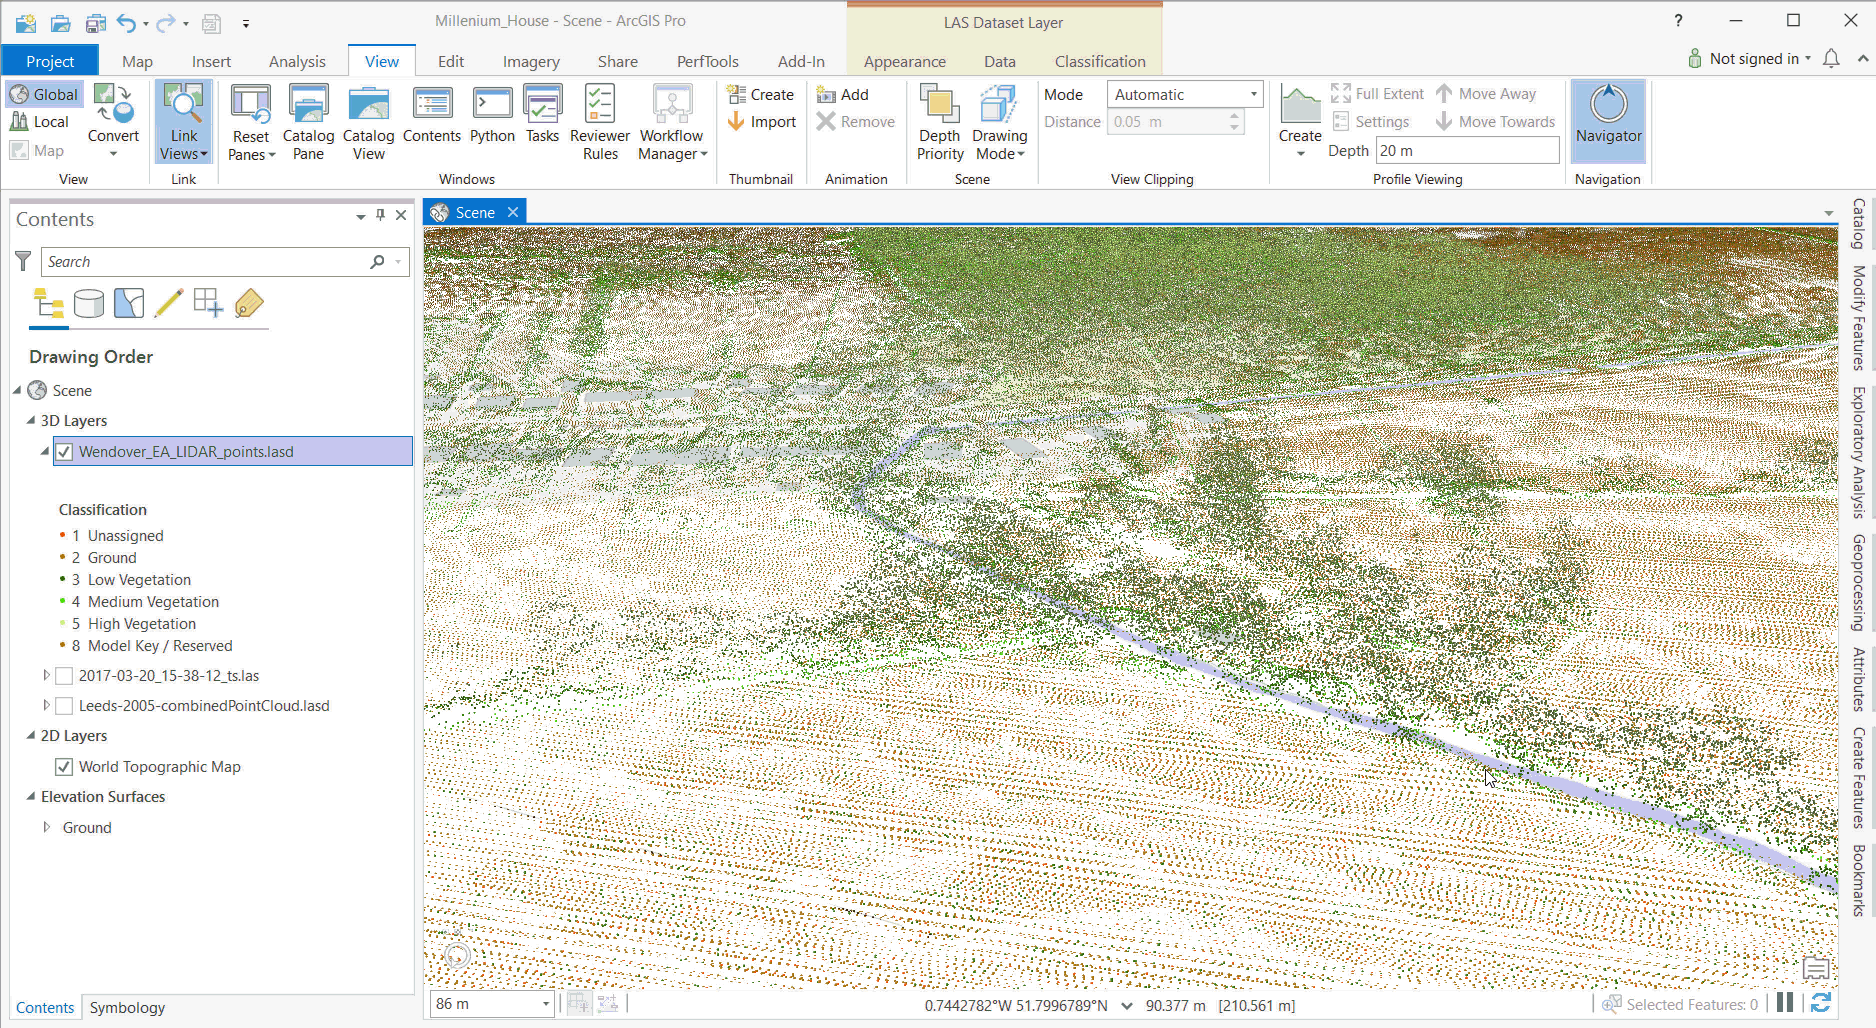 Profile View helps to understand 3D data sets - like this LiDAR scan of a group of trees.